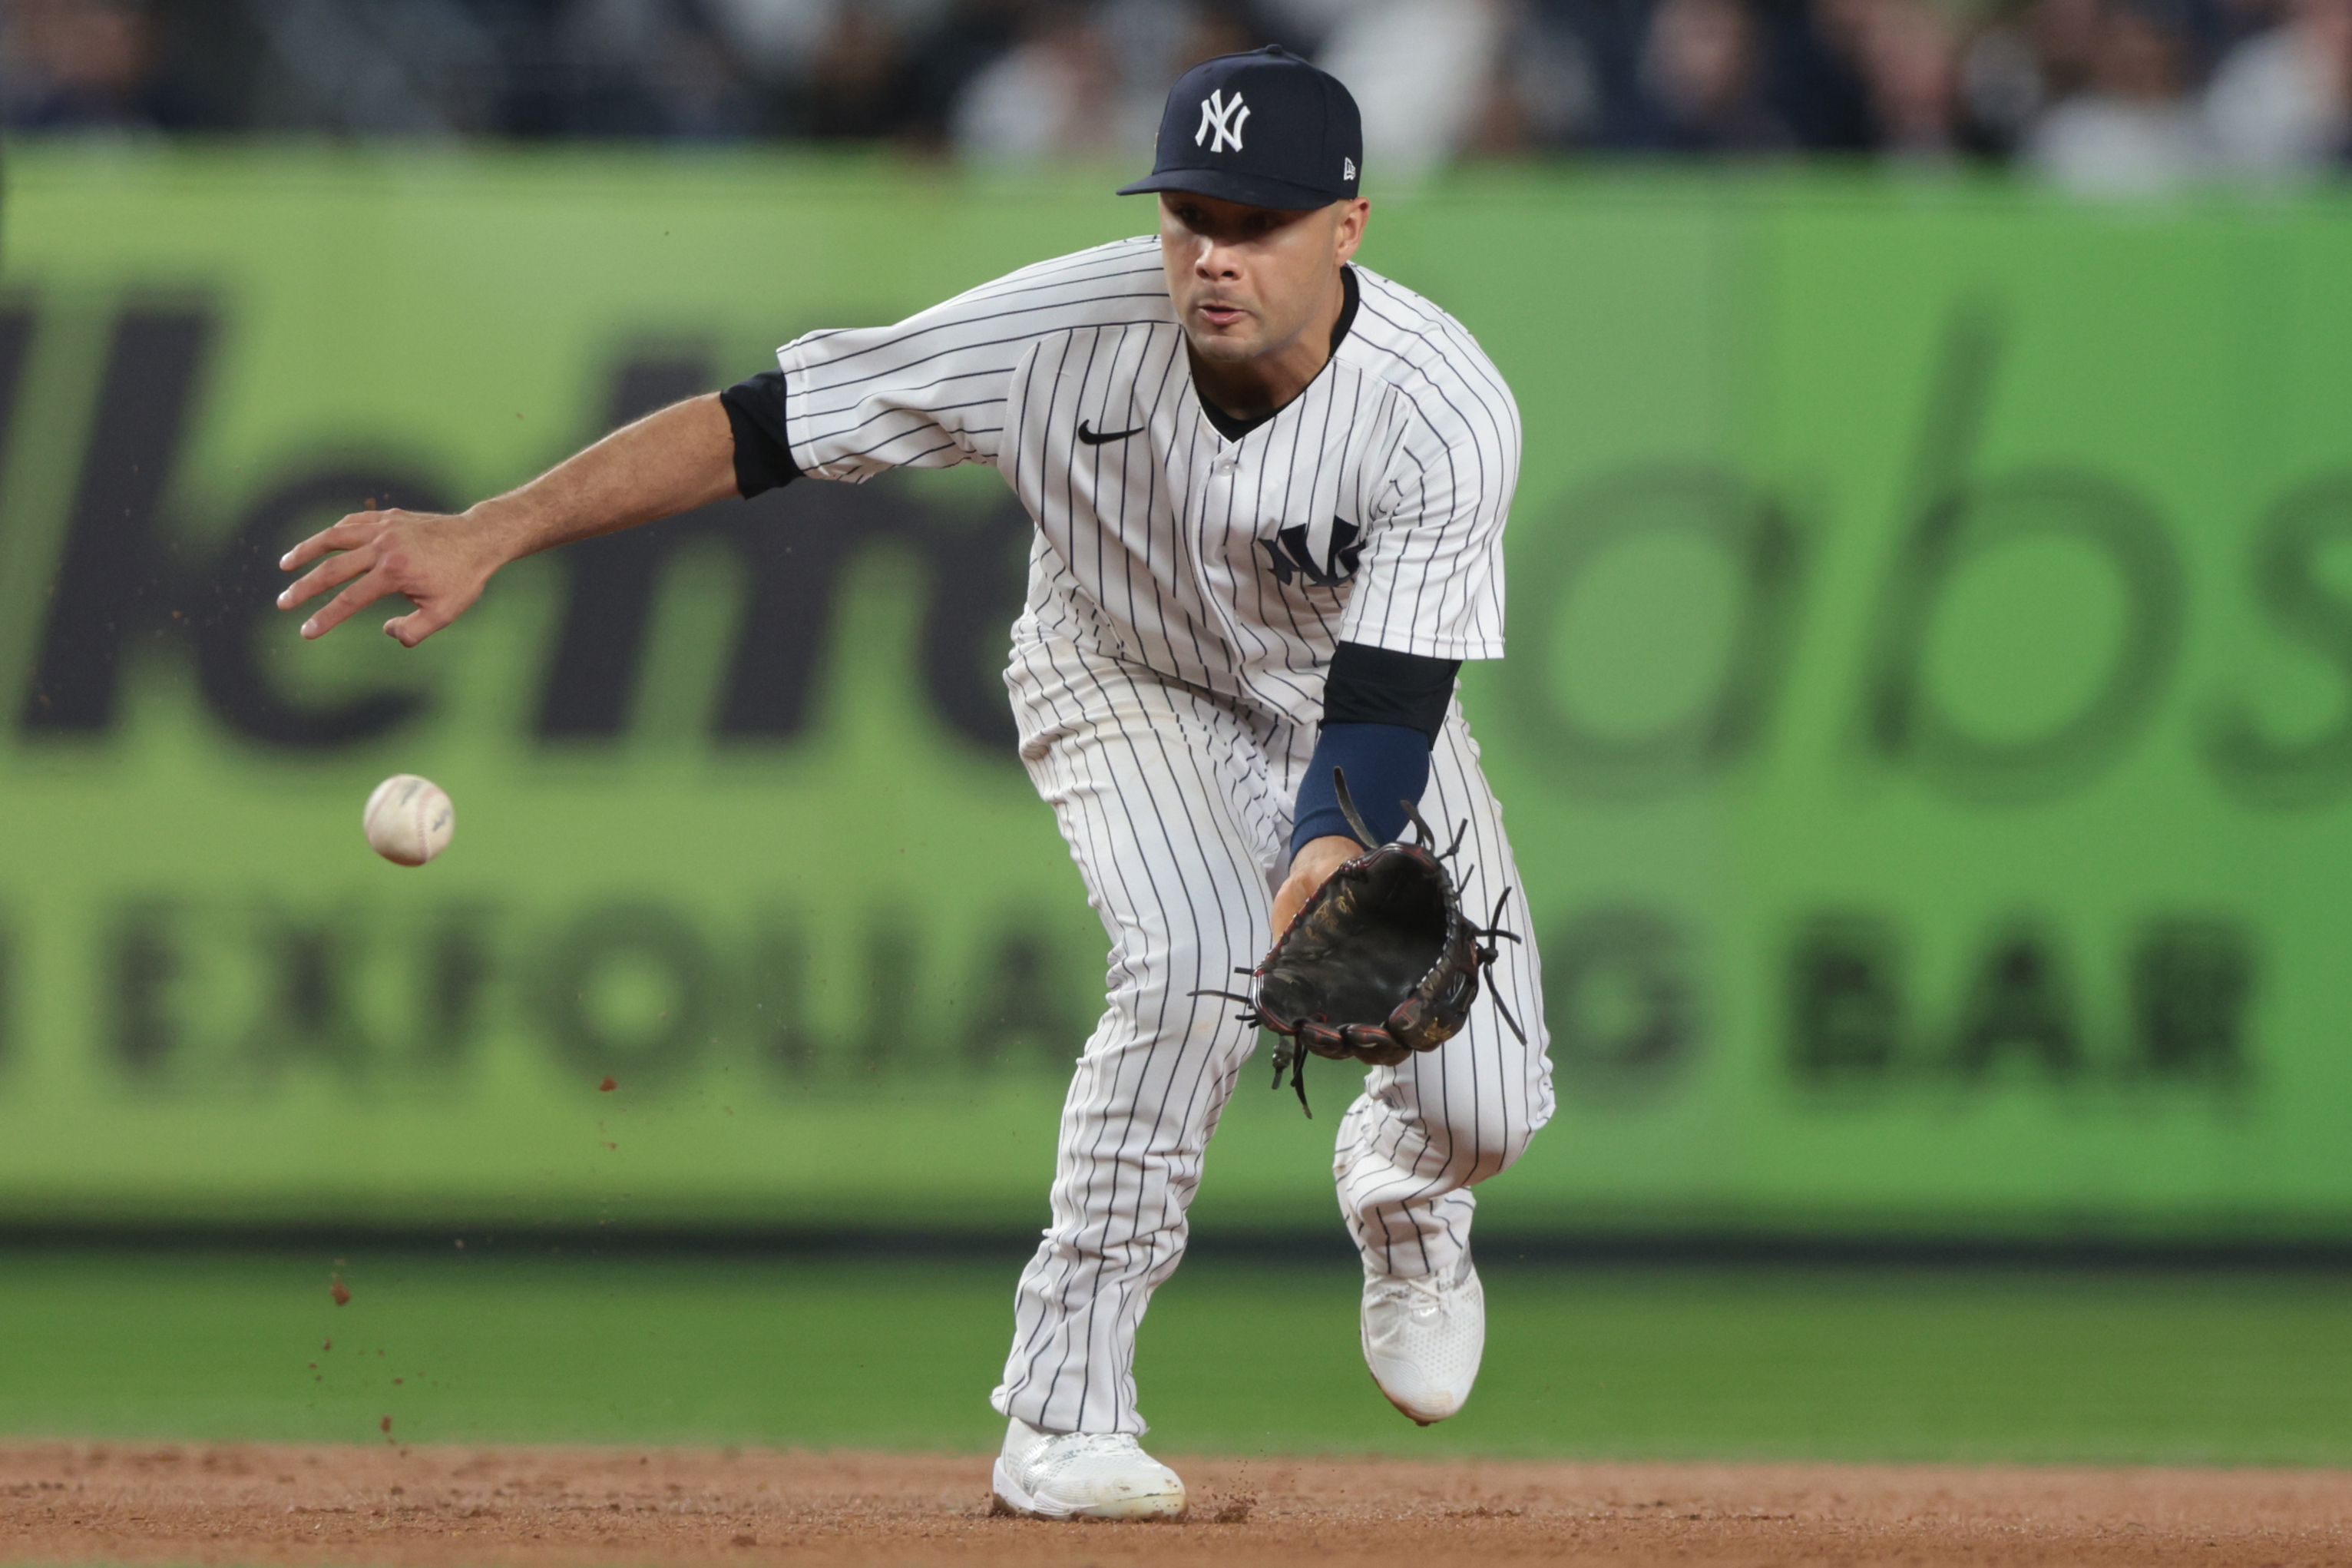 Isiah Kiner-Falefa's range blessing and curse for Yankees